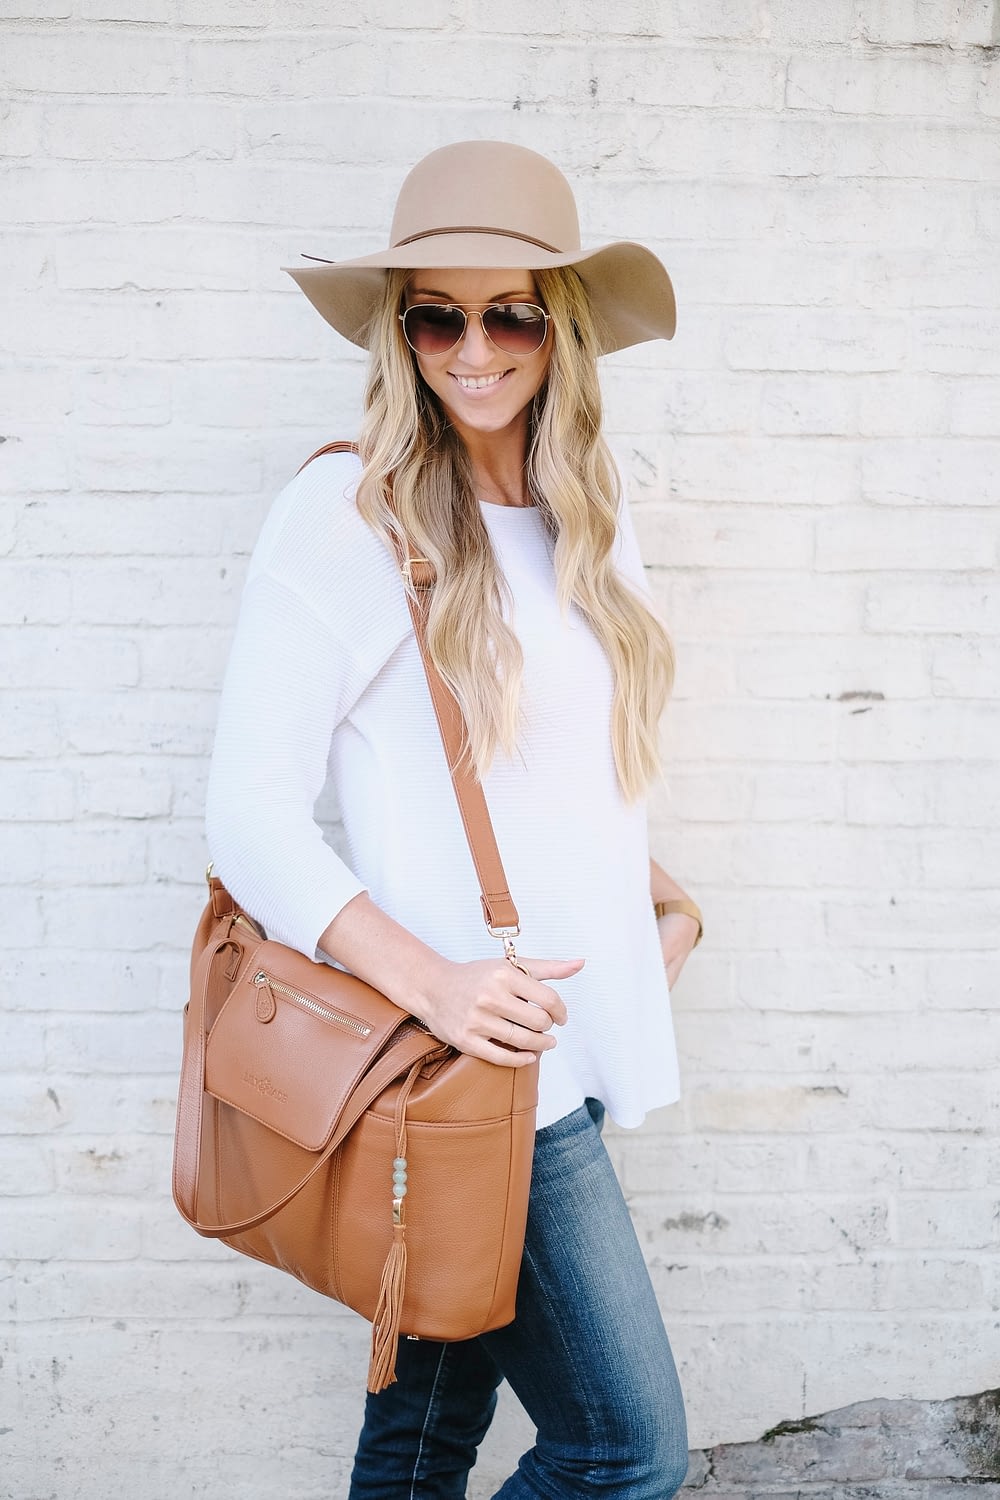 blonde woman carrying leather diaper bag with messenger strap on shoulder